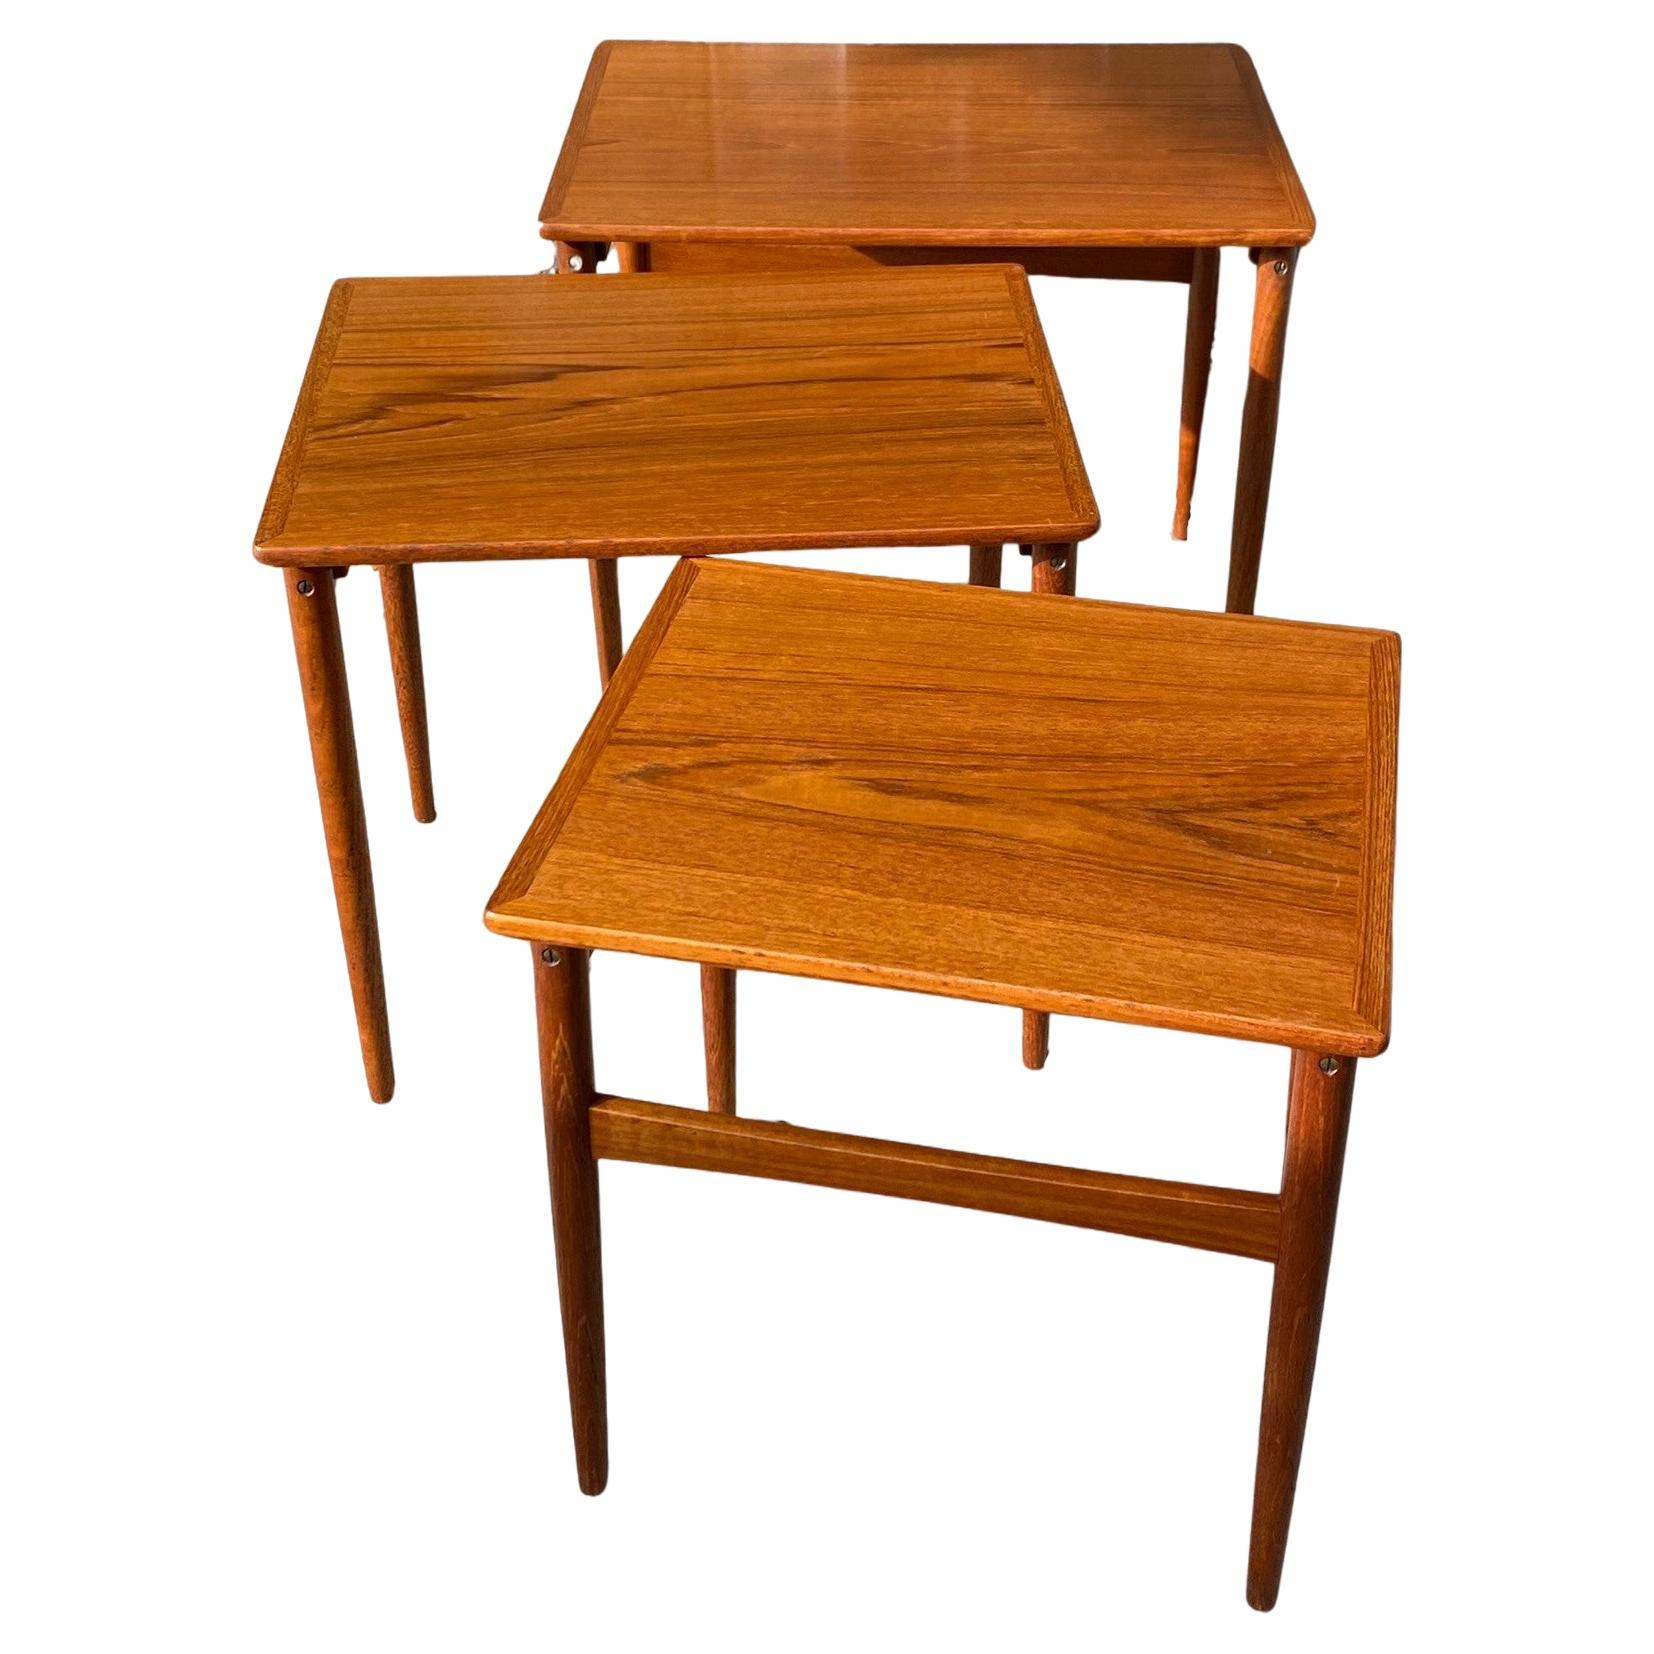 Mid-Century Teak Nest of Tables By Peter Brink for BR Gelsted, Denmark, C. 1960s For Sale